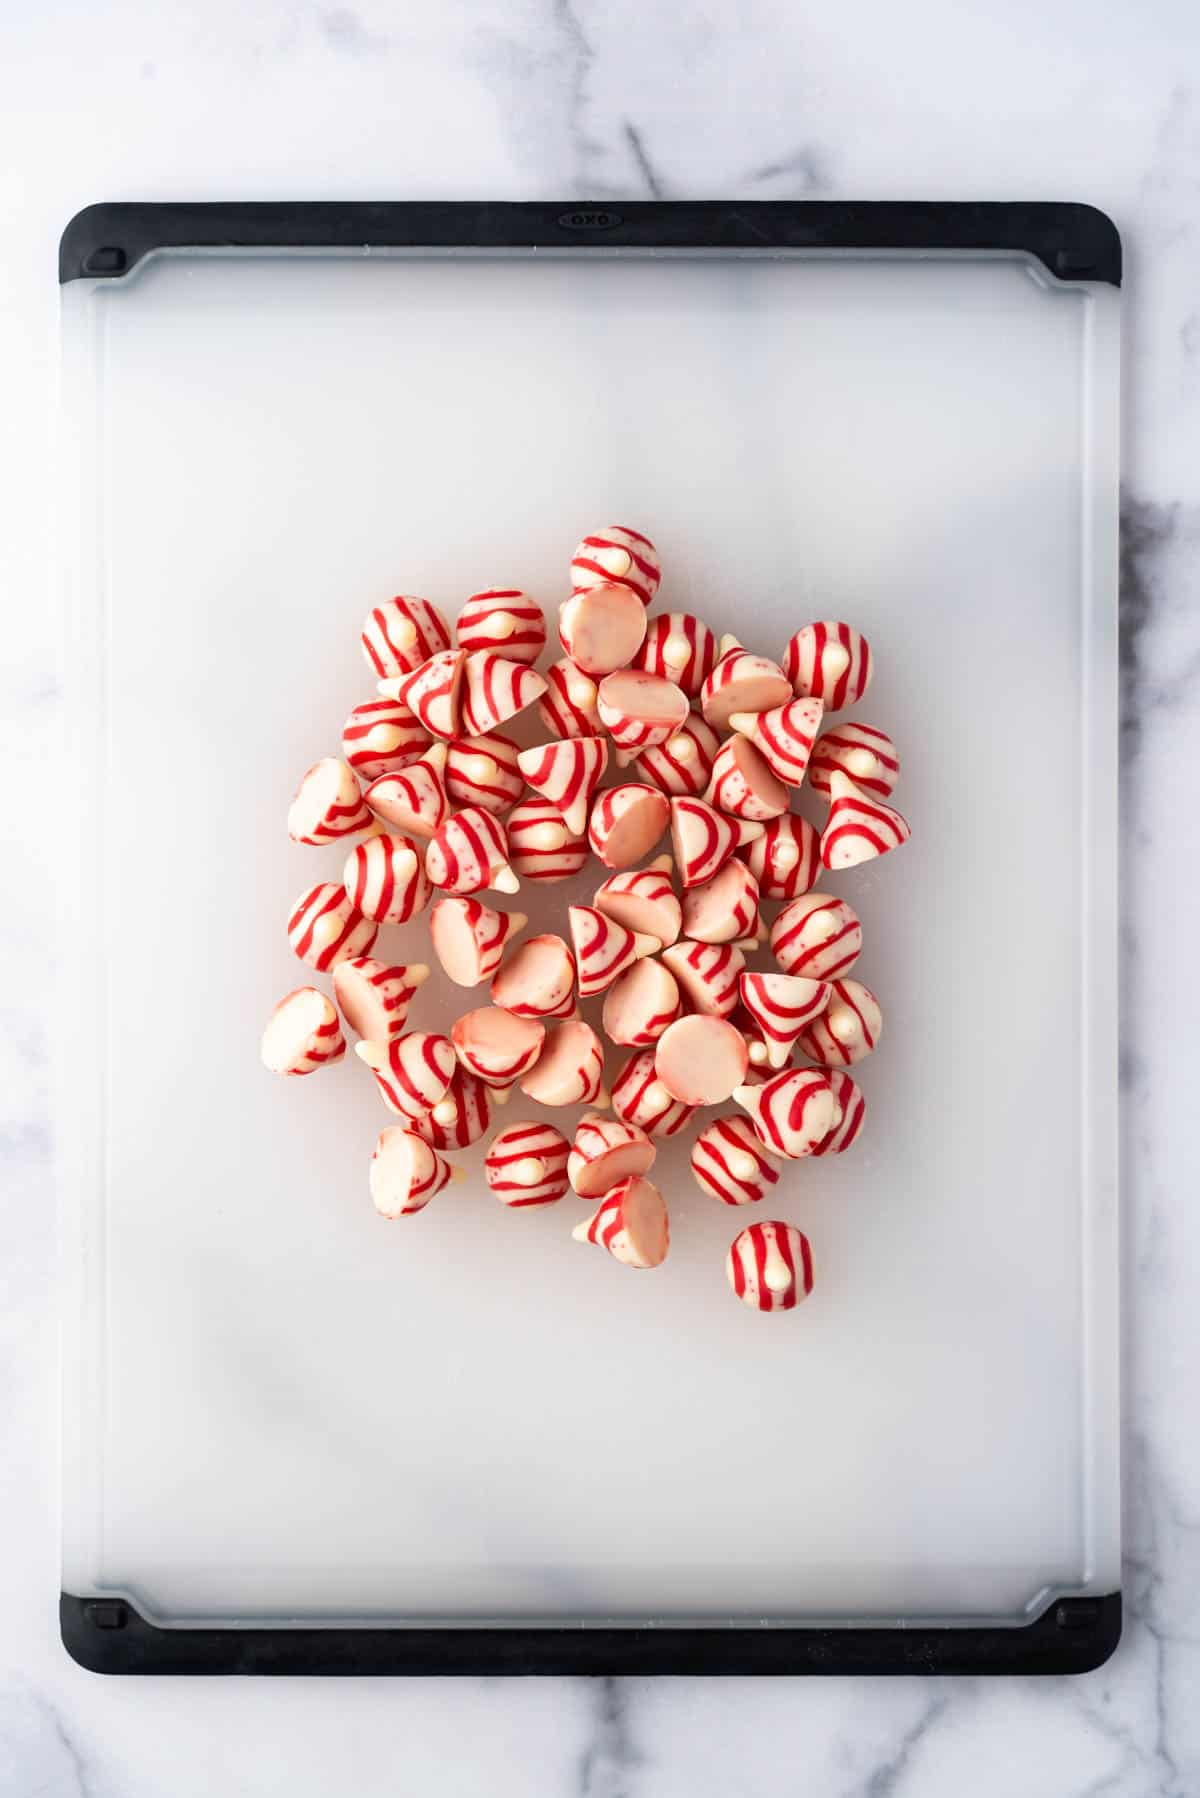 Unwrapped Hershey's candy cane kisses on a cutting board.